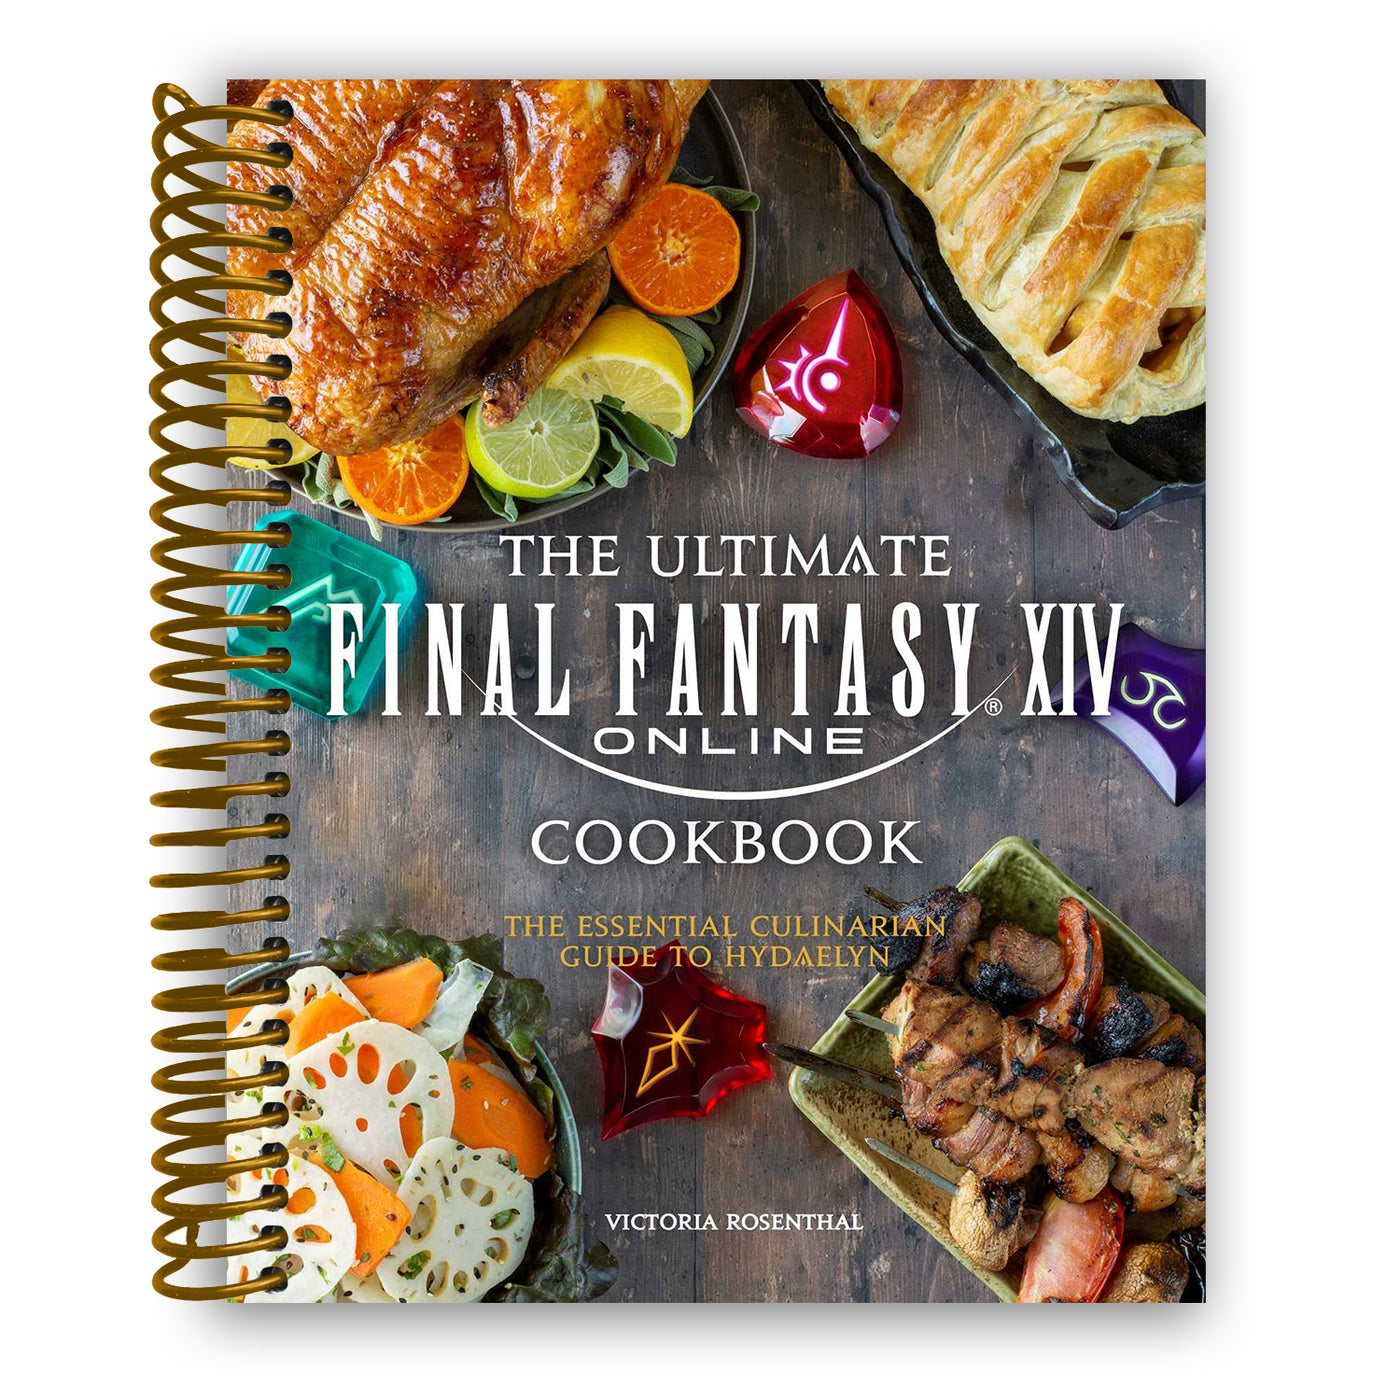 The Ultimate Final Fantasy XIV Cookbook: The Essential Culinarian Guide to Hydaelyn (Spiral Bound)